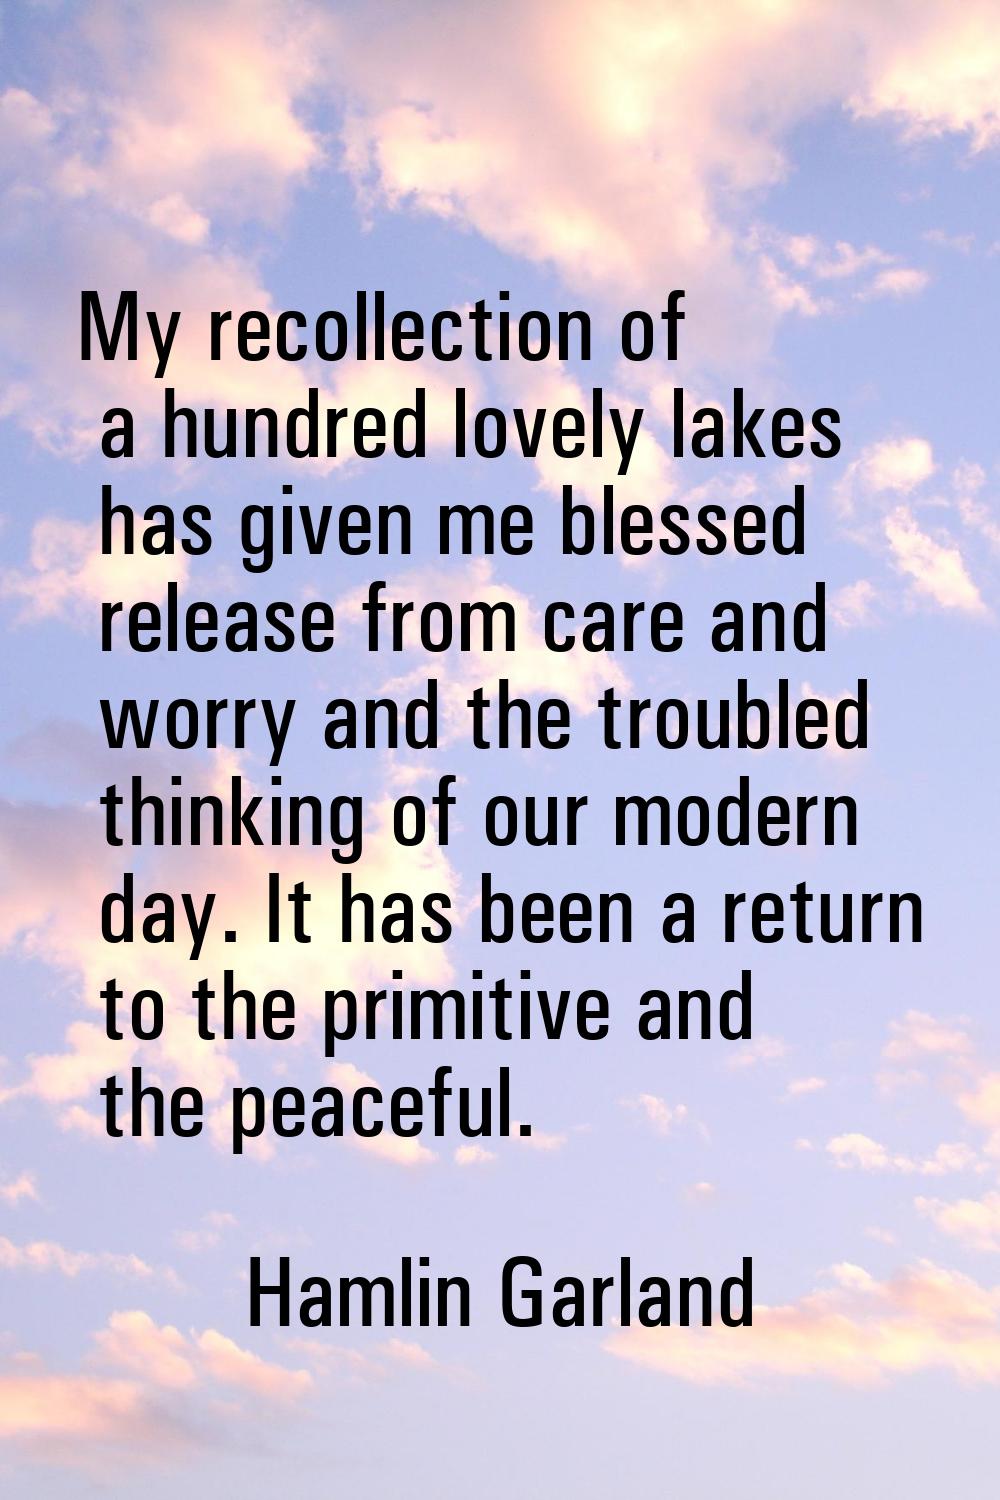 My recollection of a hundred lovely lakes has given me blessed release from care and worry and the 